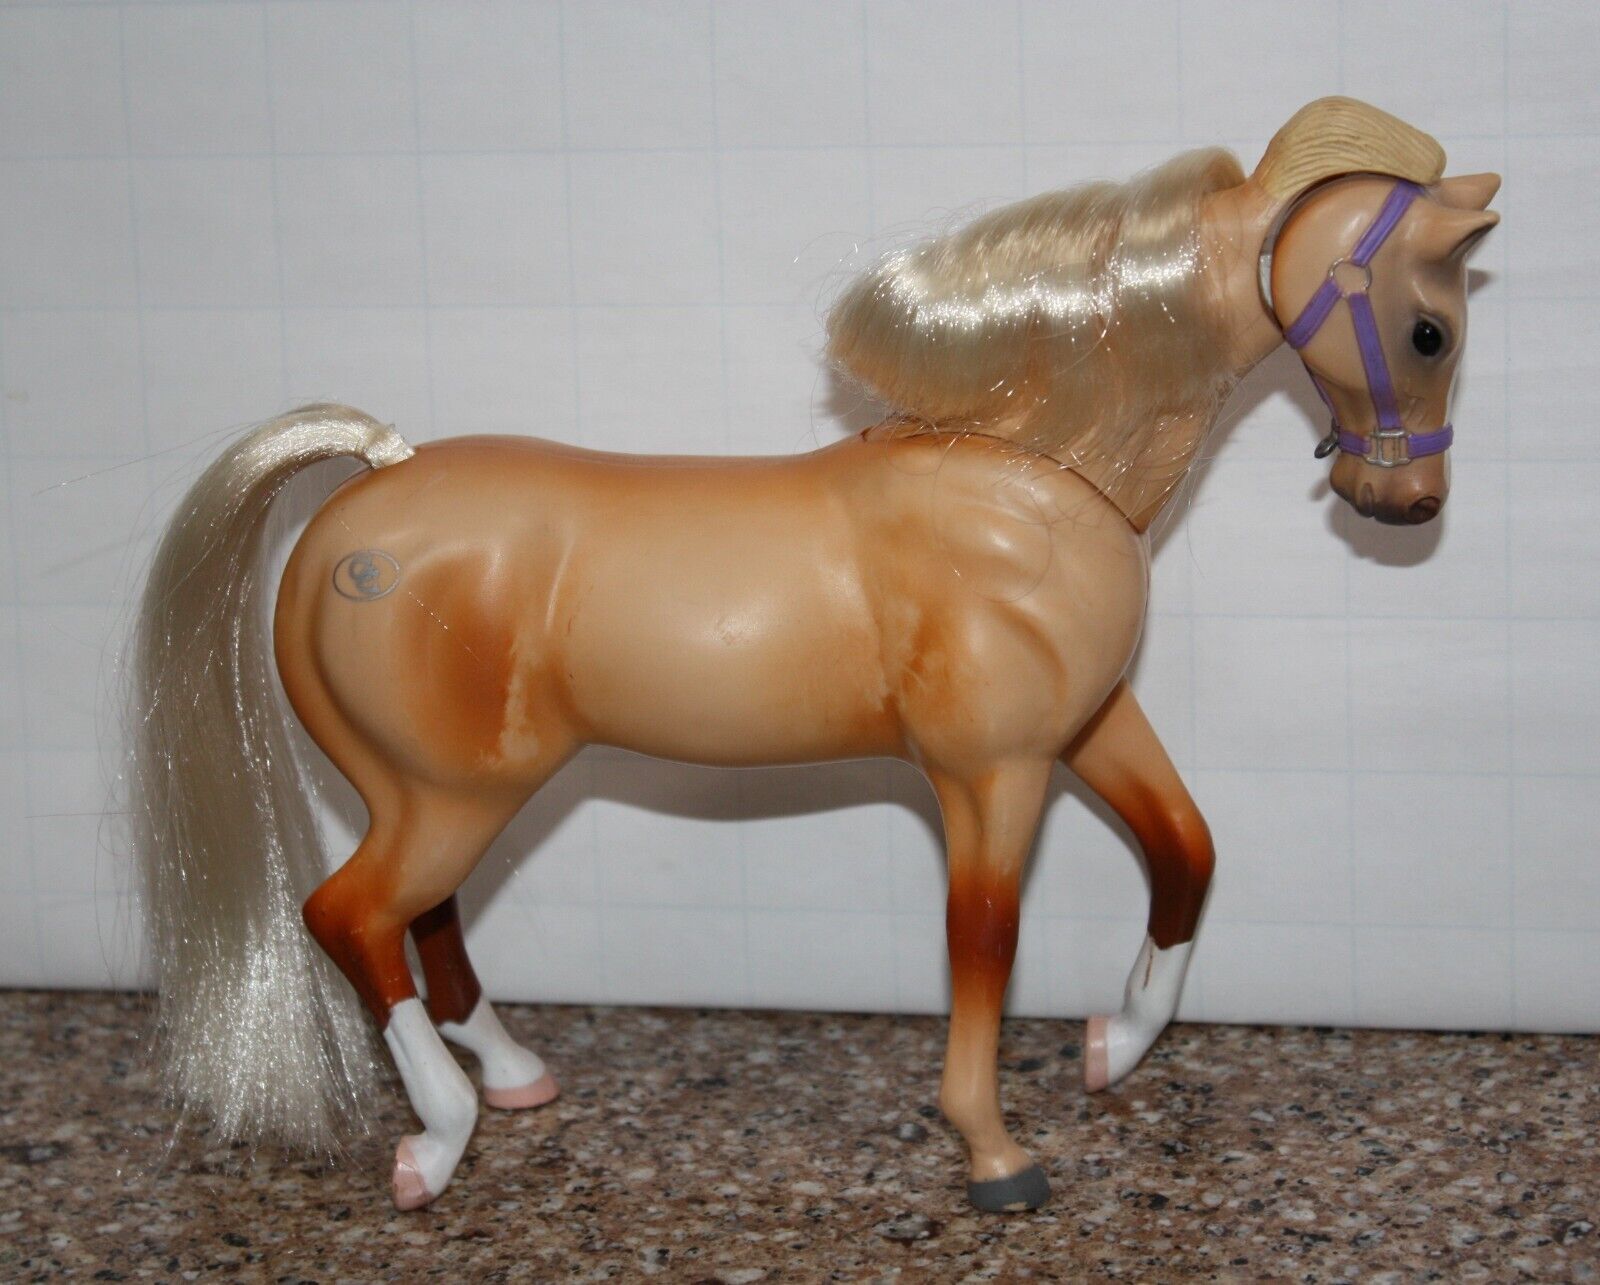 Vtg 1996 Empire Grand Champions Toys Palamino HORSE w/ Movable Head and Neck